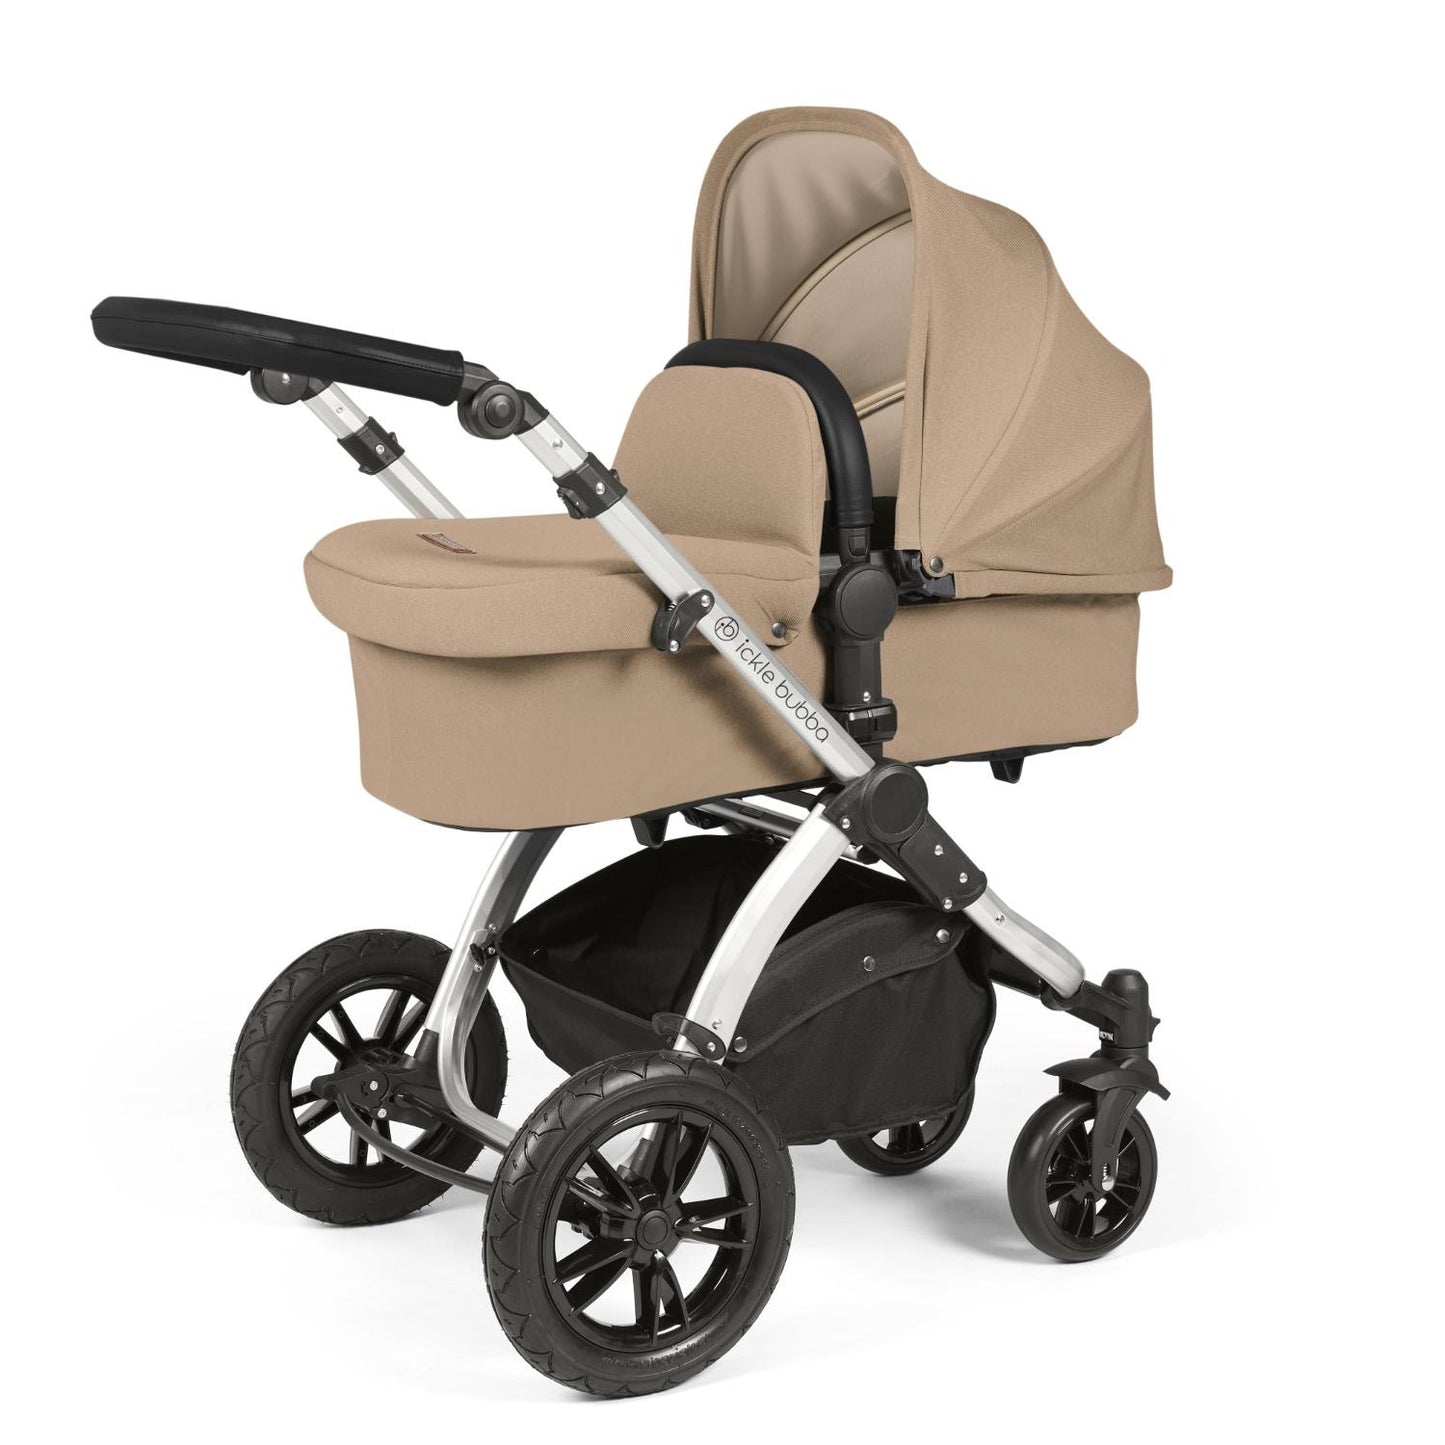 Ickle Bubba Stomp Luxe Pushchair with carrycot attached in Desert beige colour with silver chassis